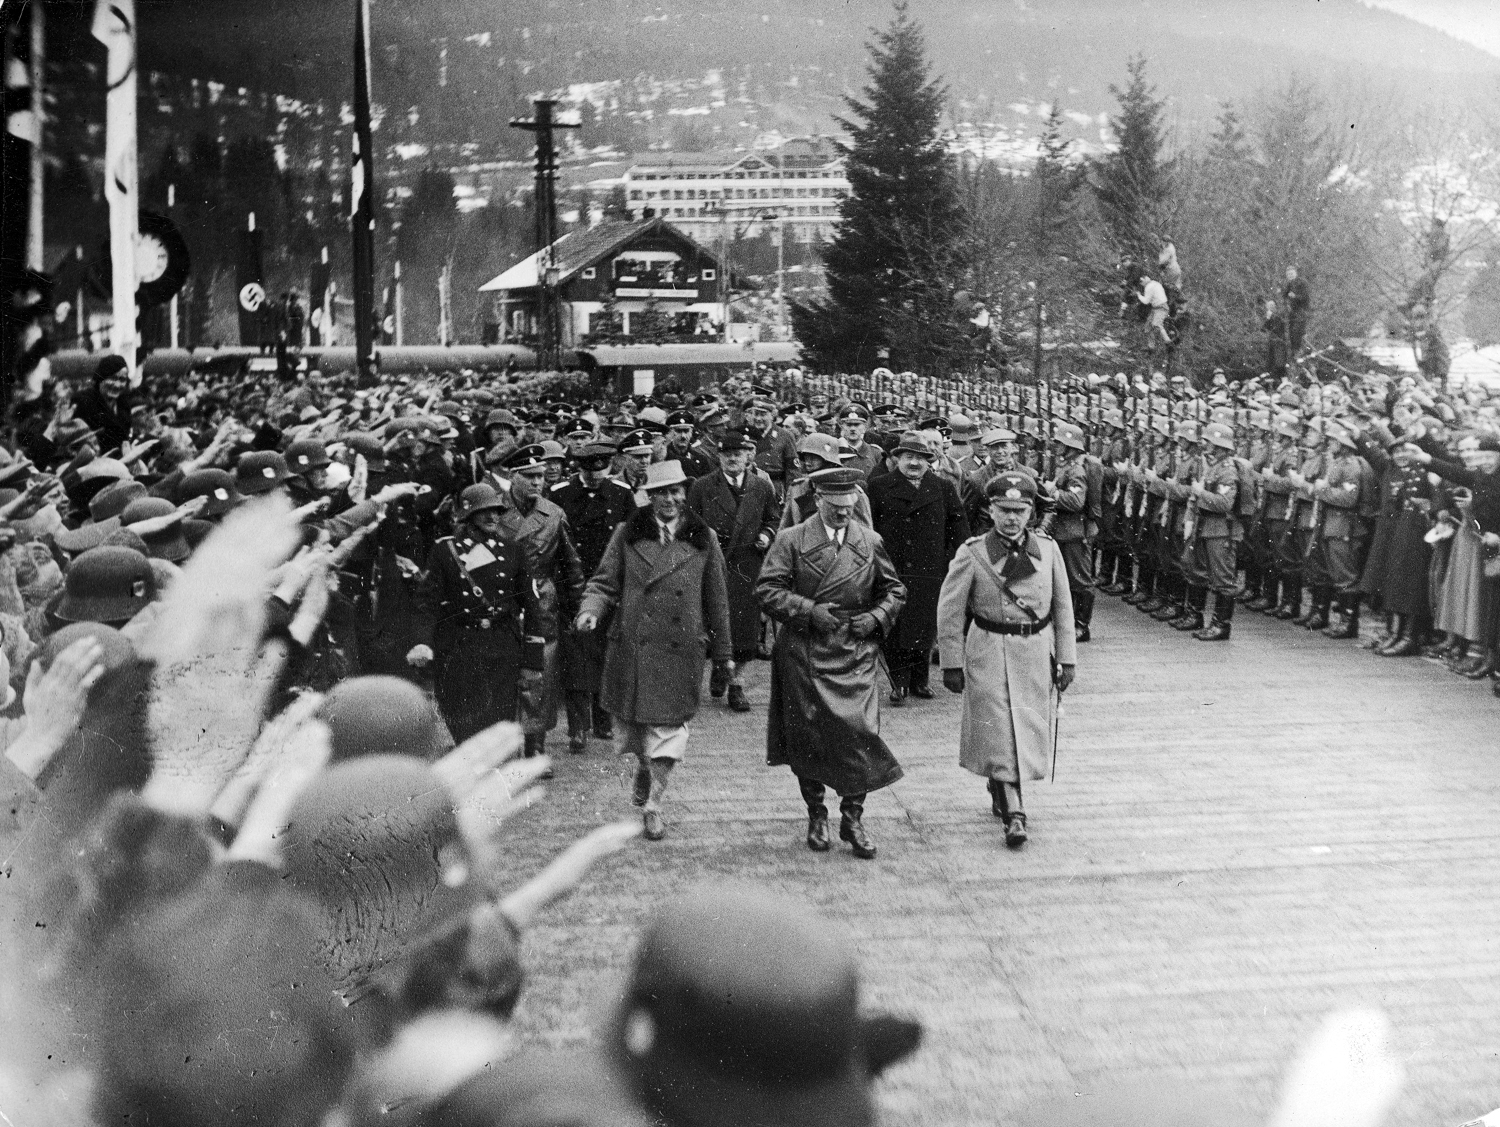 Adolf Hitler arrives for the closing ceremony of the Winter Olympic games in Garmisch-Partenkirchen